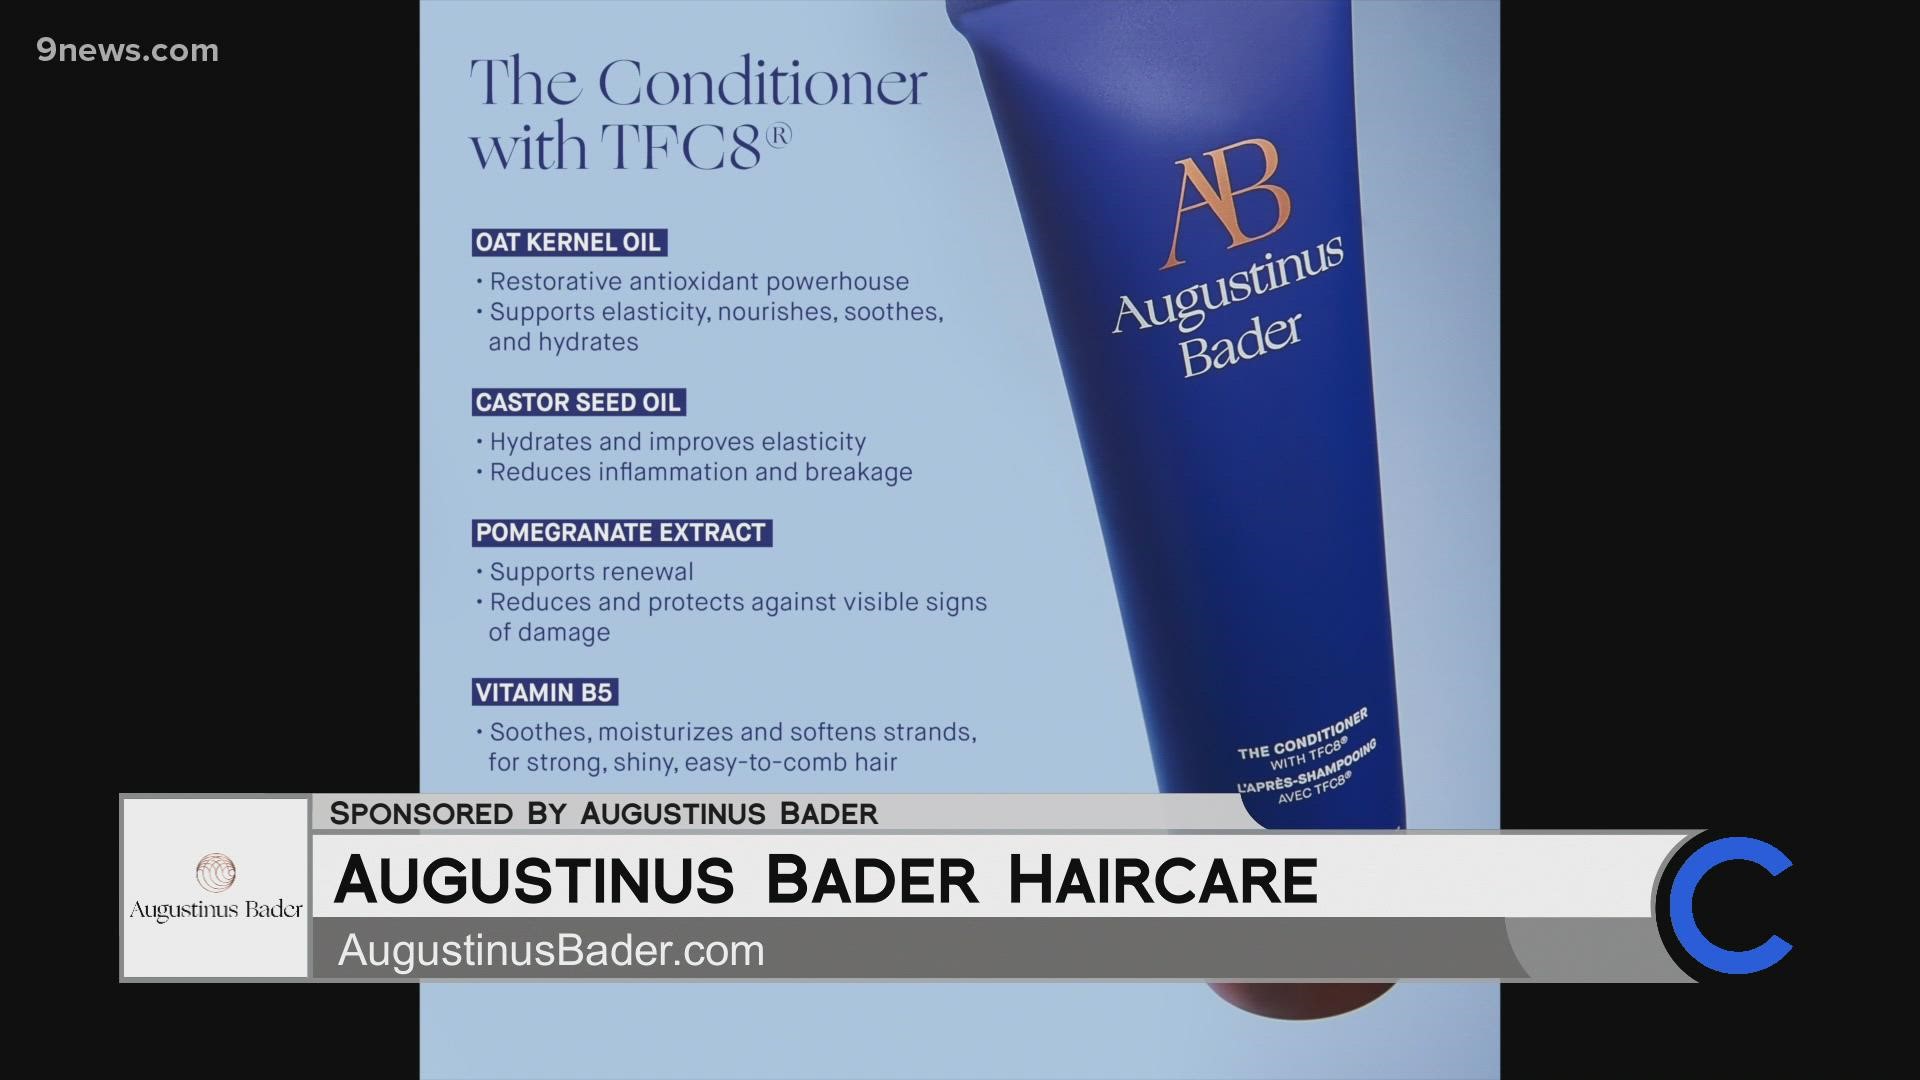 Visit AugustinusBader.com to find all of their great skincare products, and now hair products! **PAID CONTENT**